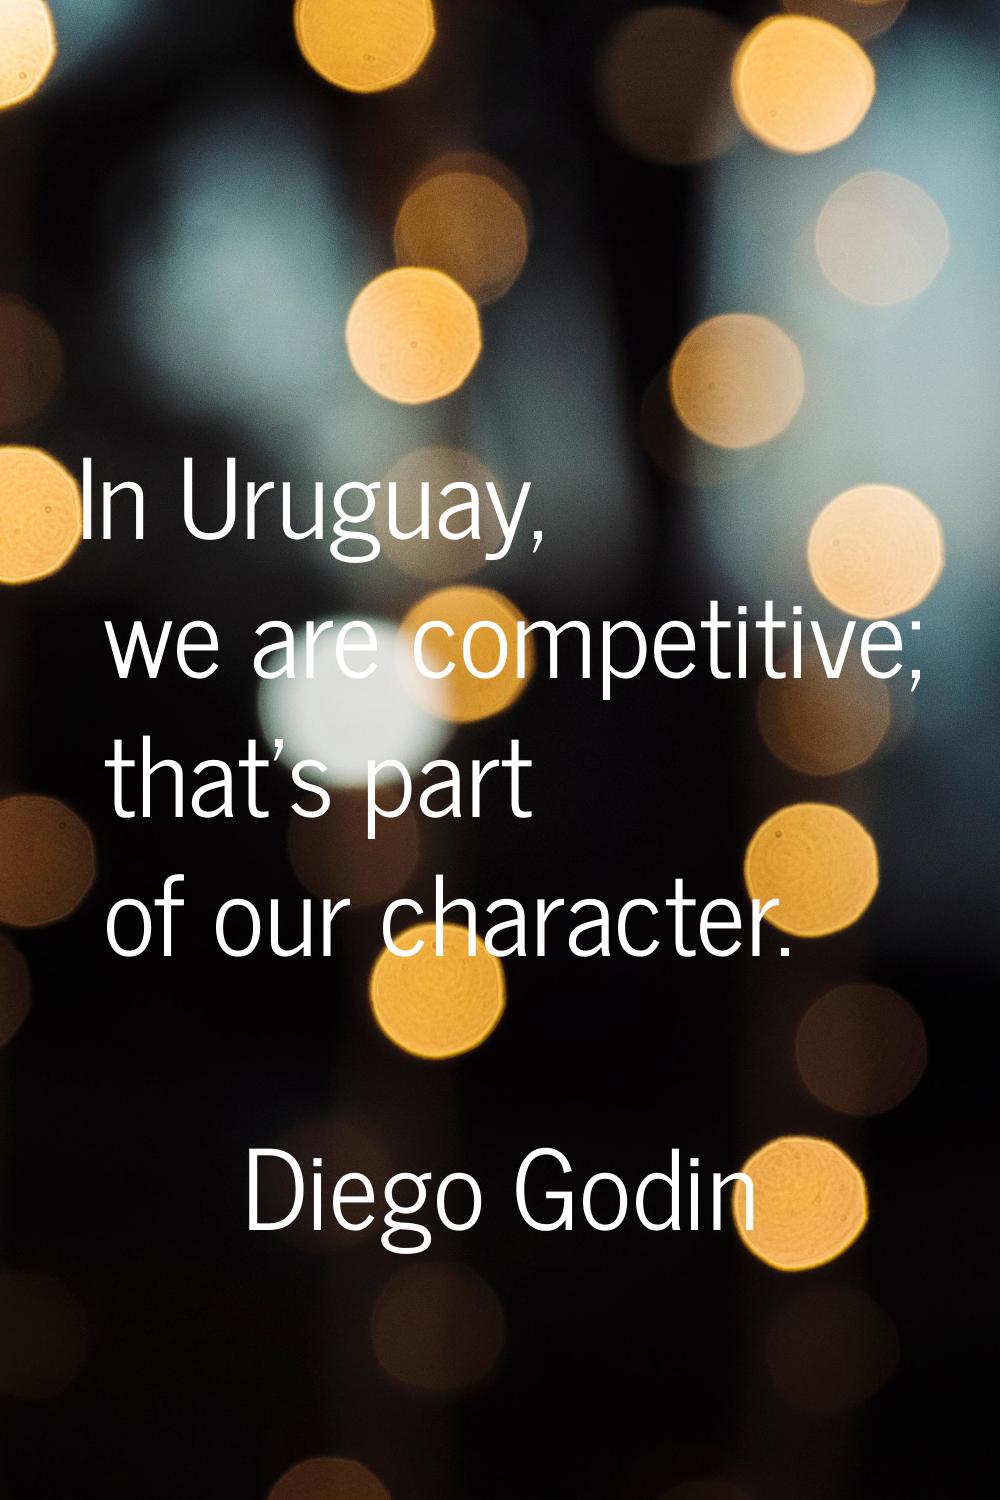 In Uruguay, we are competitive; that's part of our character.